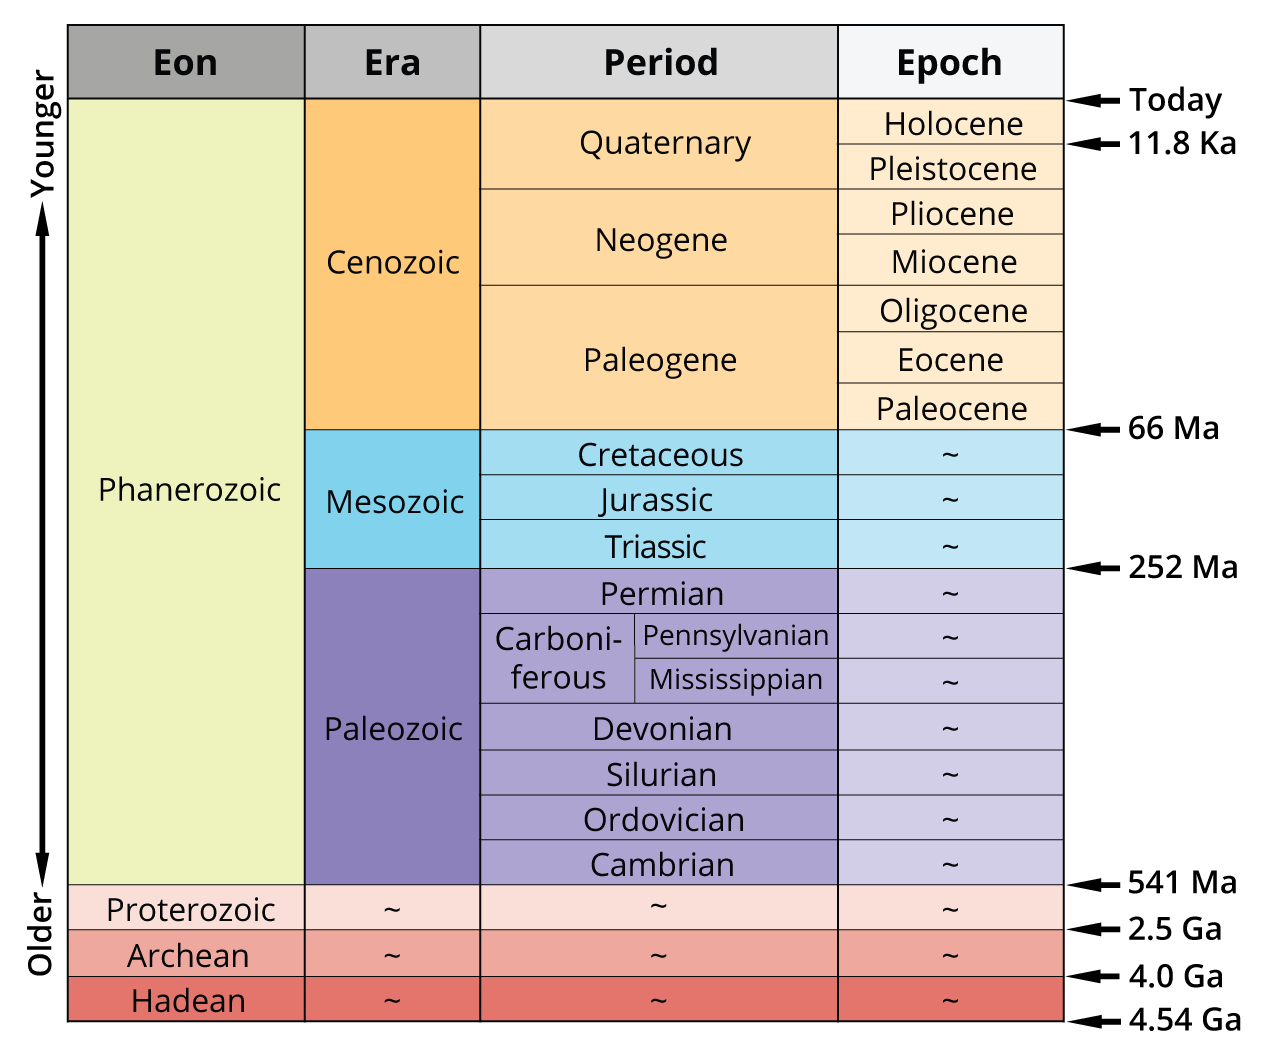 A simplified version of the geologic time scale.